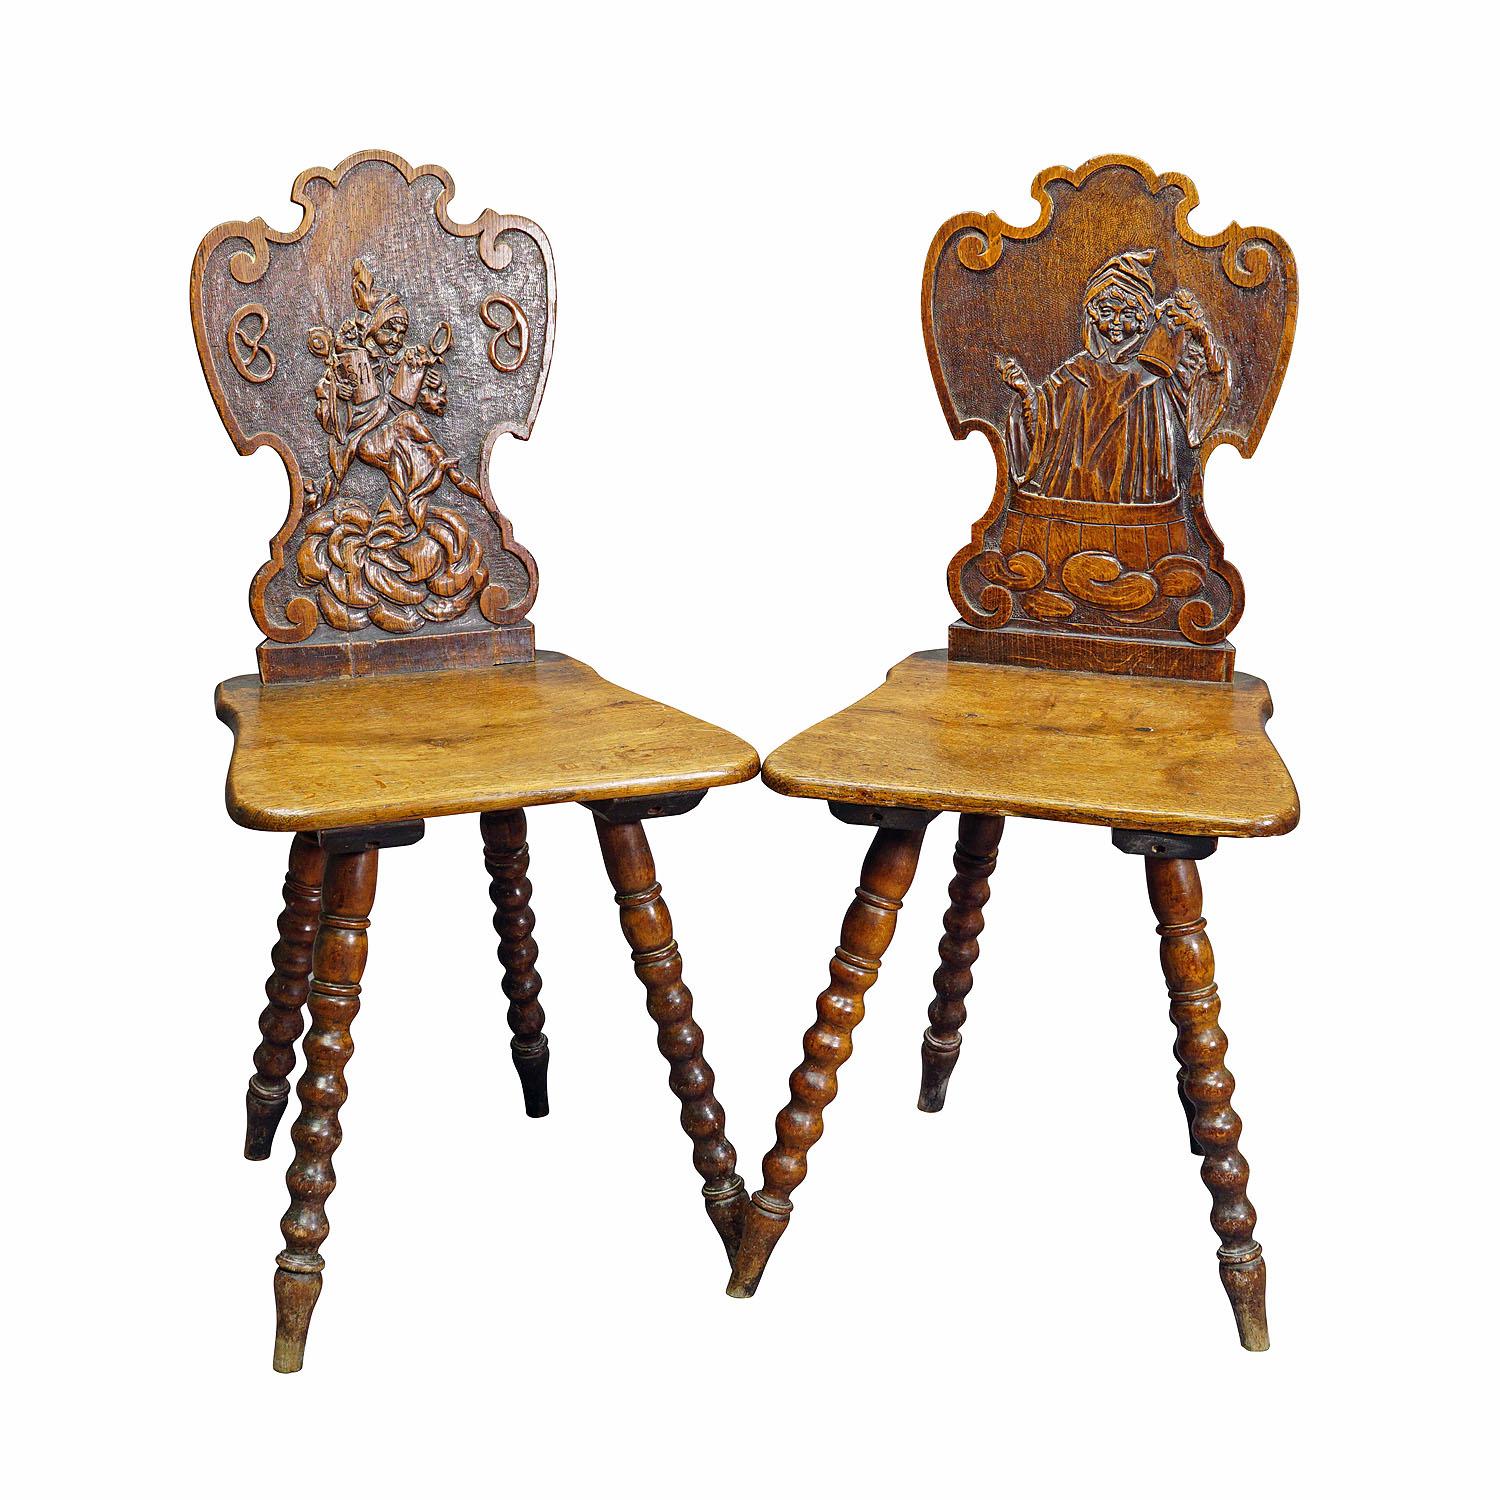 A Pair Carved Bavarian Board Chairs ca. 1900

A pair wonderful carved oak wood board chairs from a famous munich inn. The backrests are carved with whimsy folksy scenes of the Munich Kindl (munich kid), Germany, ca. 1900.

The tradition of wood